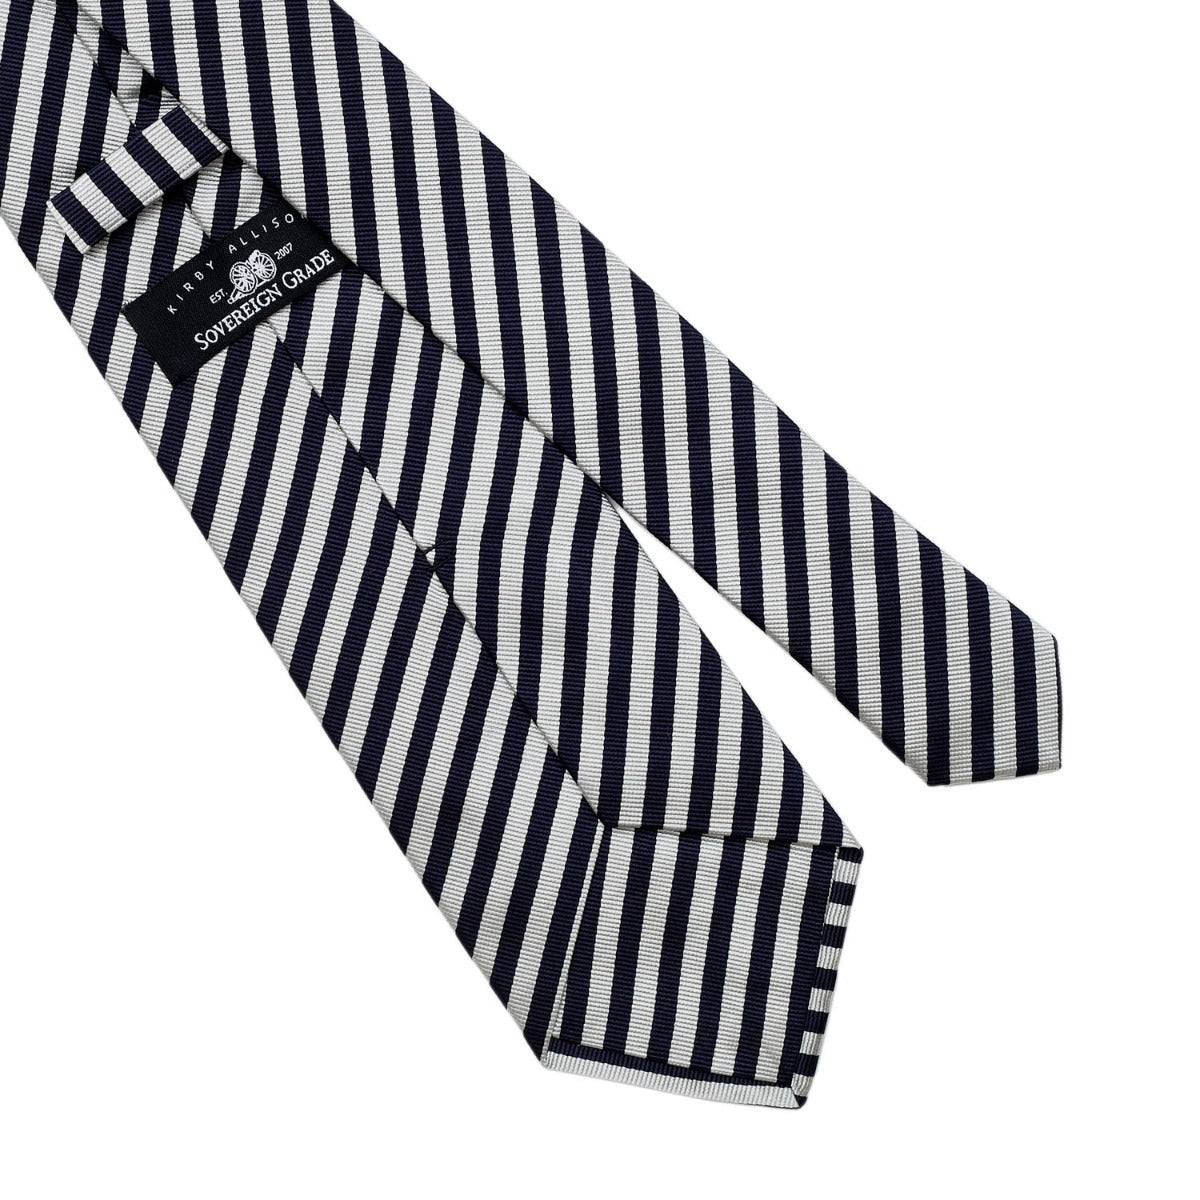 A Sovereign Grade Navy and Silver London Stripe Silk Tie on a white background, from KirbyAllison.com in the United Kingdom.